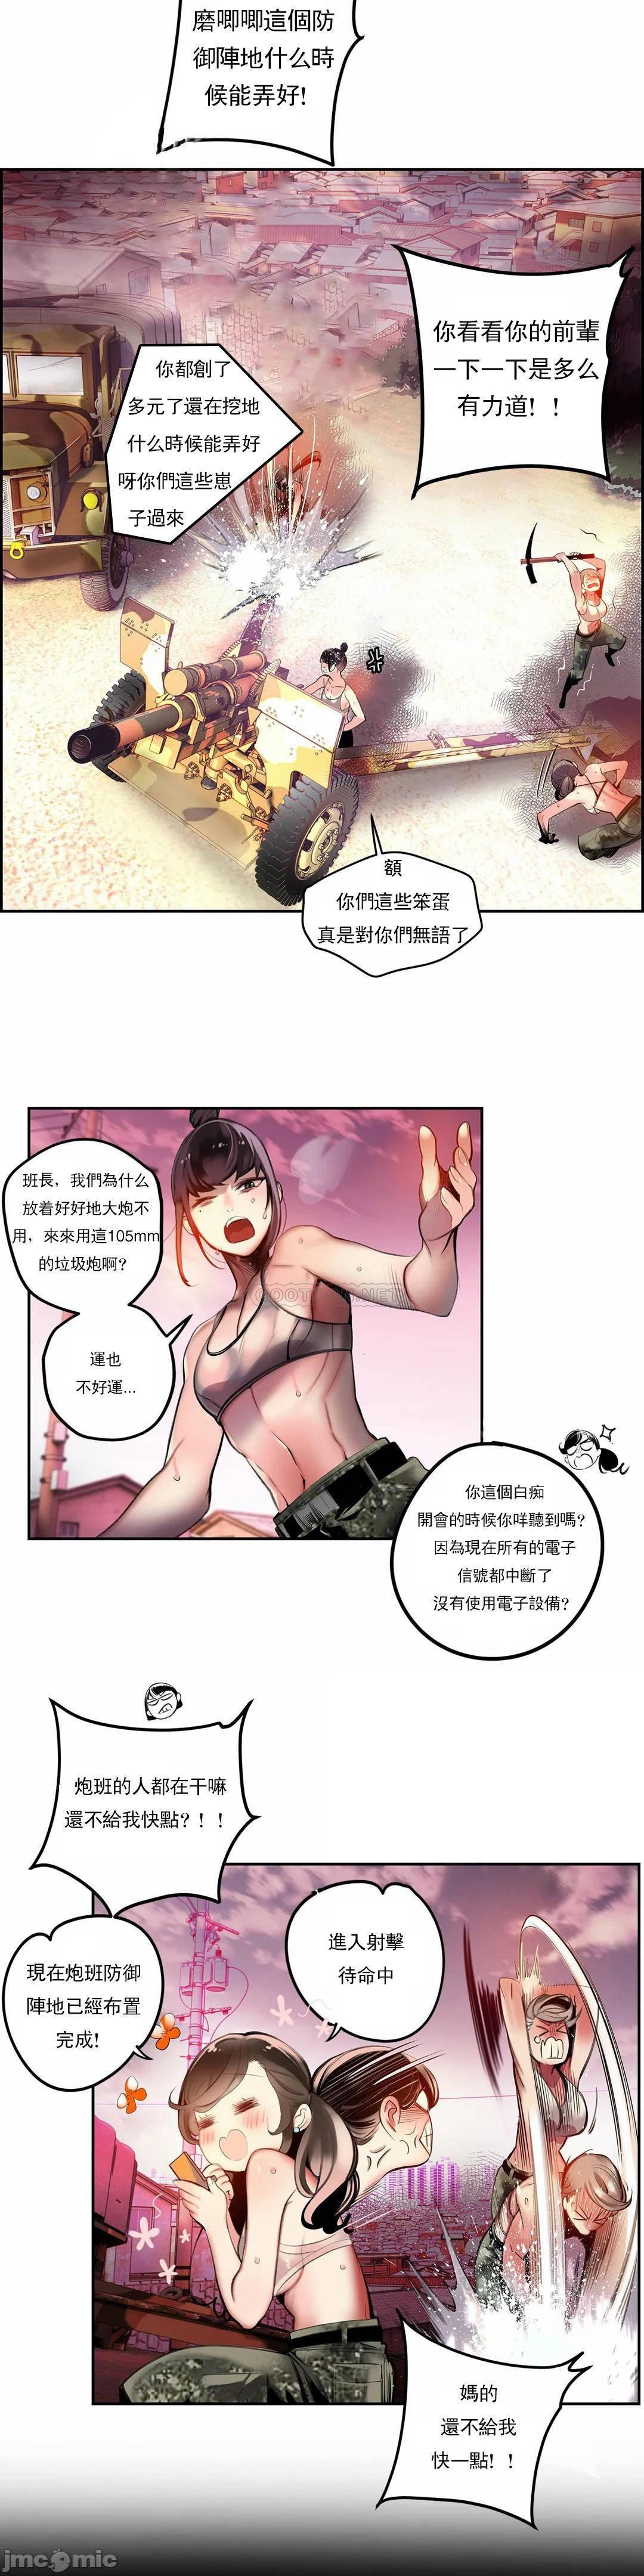 [Juder] Lilith`s Cord (第二季) Ch.77-93 end [Chinese] 337